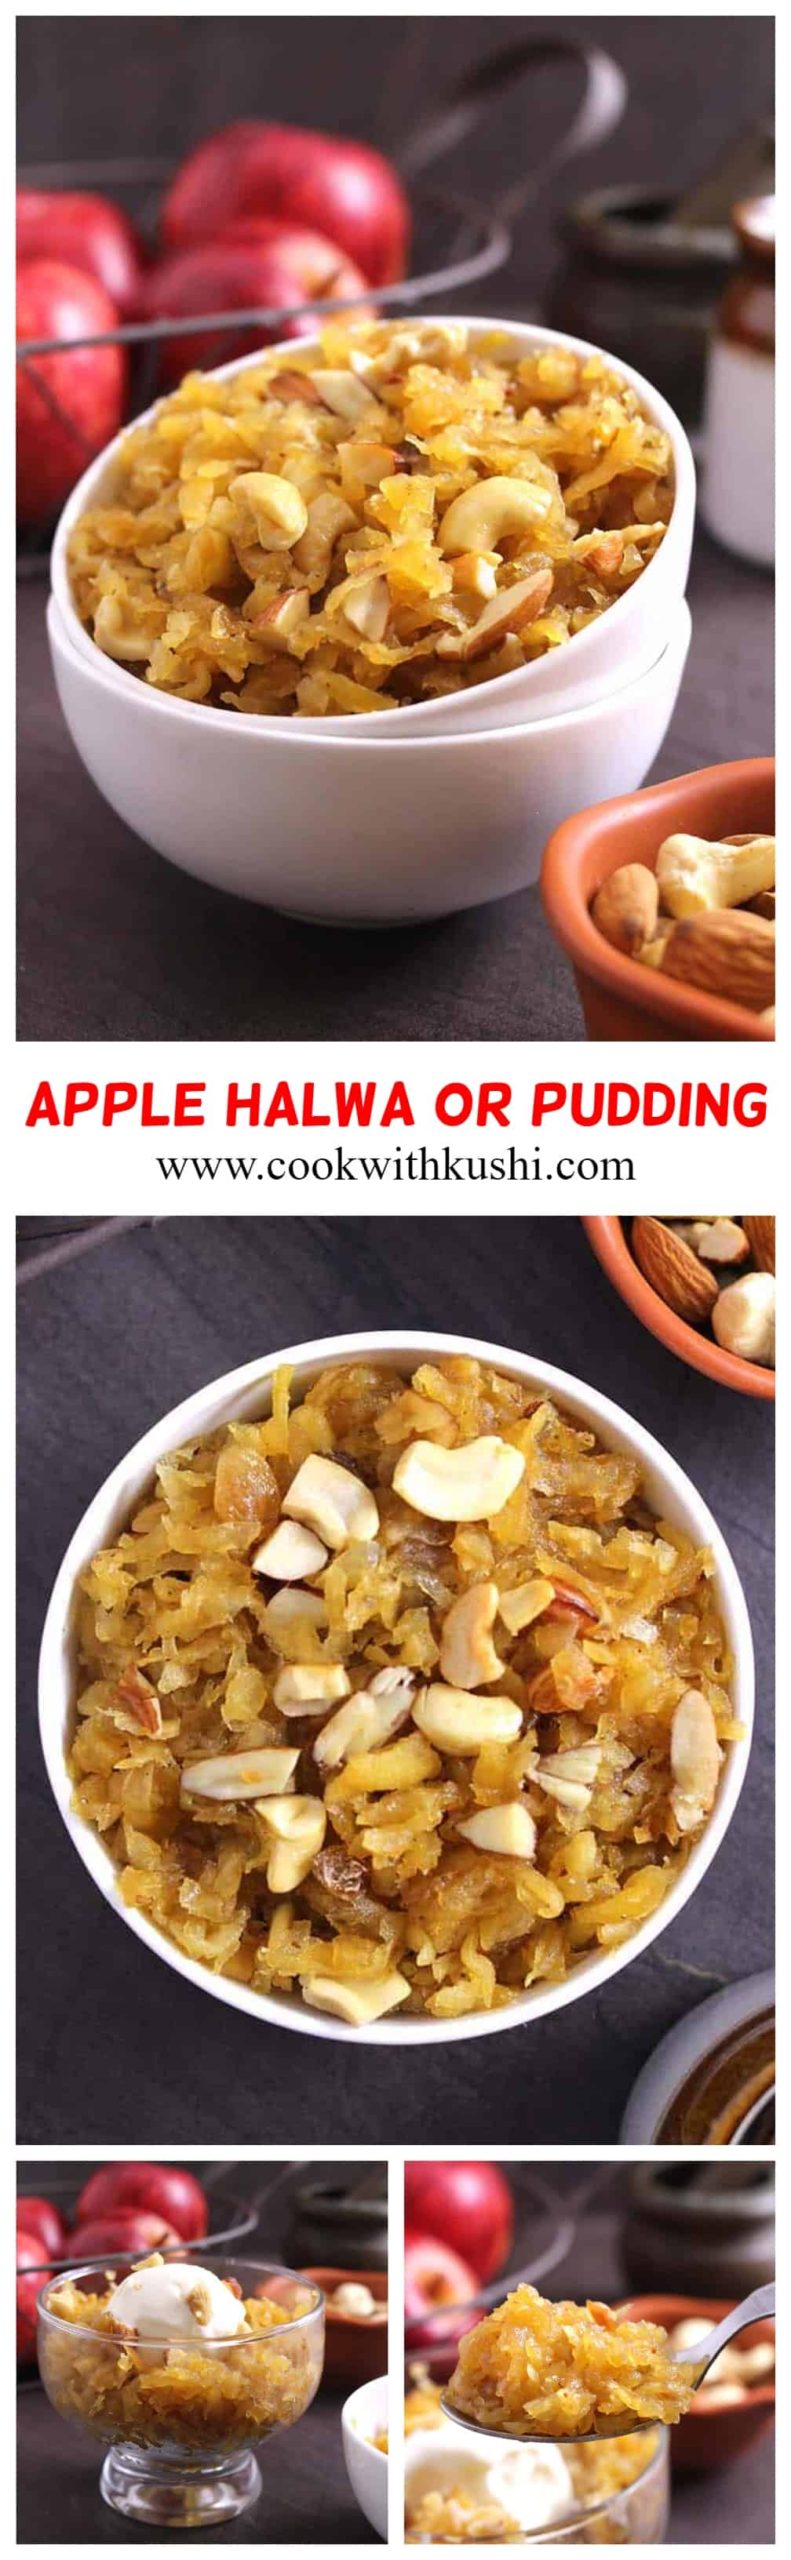 Apple Halwa or Apple pudding is one of the most easiest and simple yet delicious and flavorful sweet or dessert recipe prepared in less than 30 minutes. One of the best recipe to try when apples are in season specially during fall  or Diwali. #apples #applerecipes #appledesserts #applehalwa #applepudding